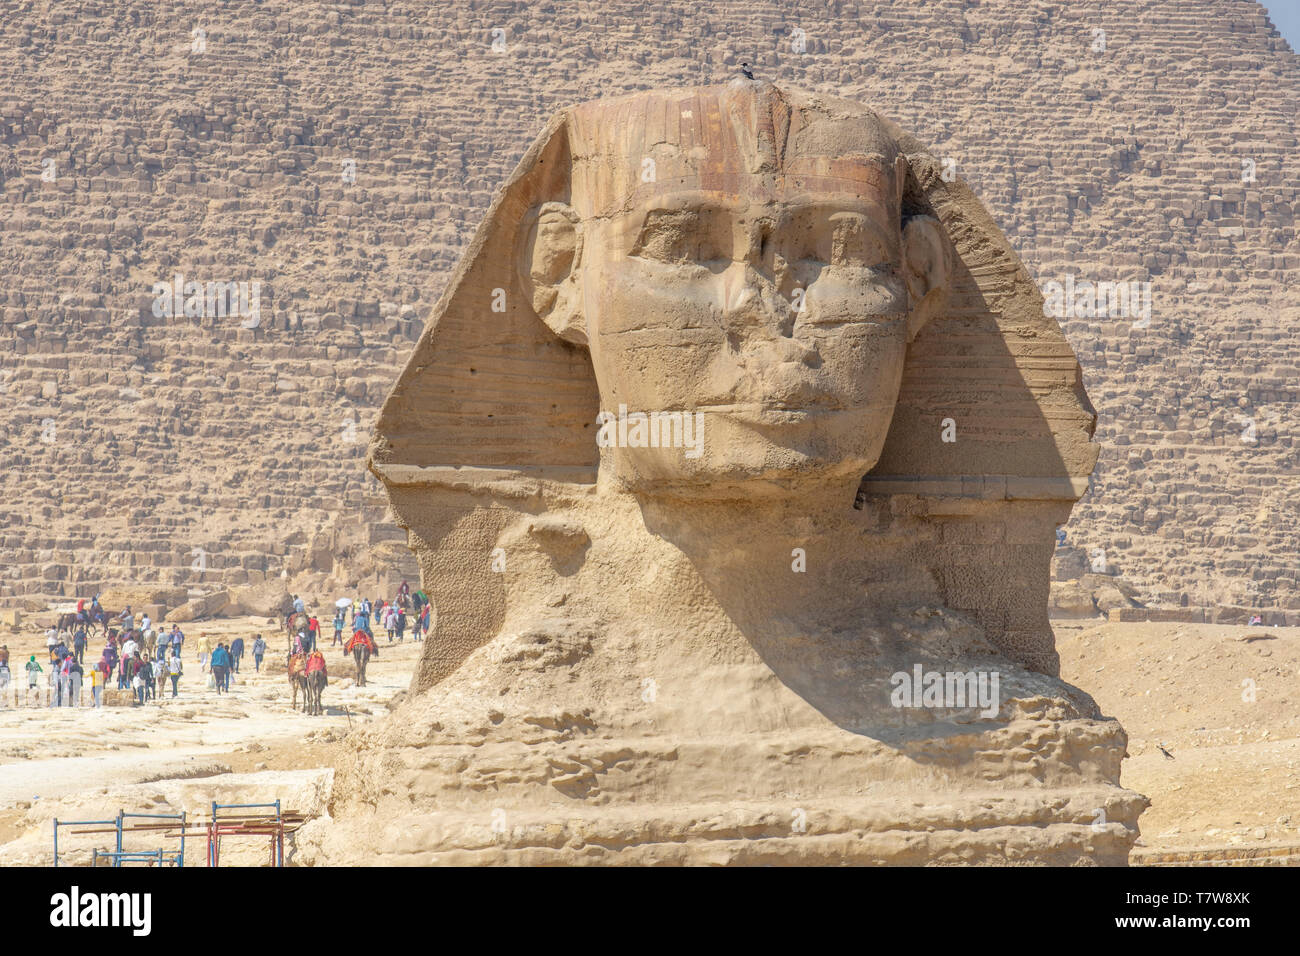 Visitors seem tiny as they pass near the Great Sphinx of Giza, believed to have been created around 2500 BCE for Pharaoh Khafra. Stock Photo